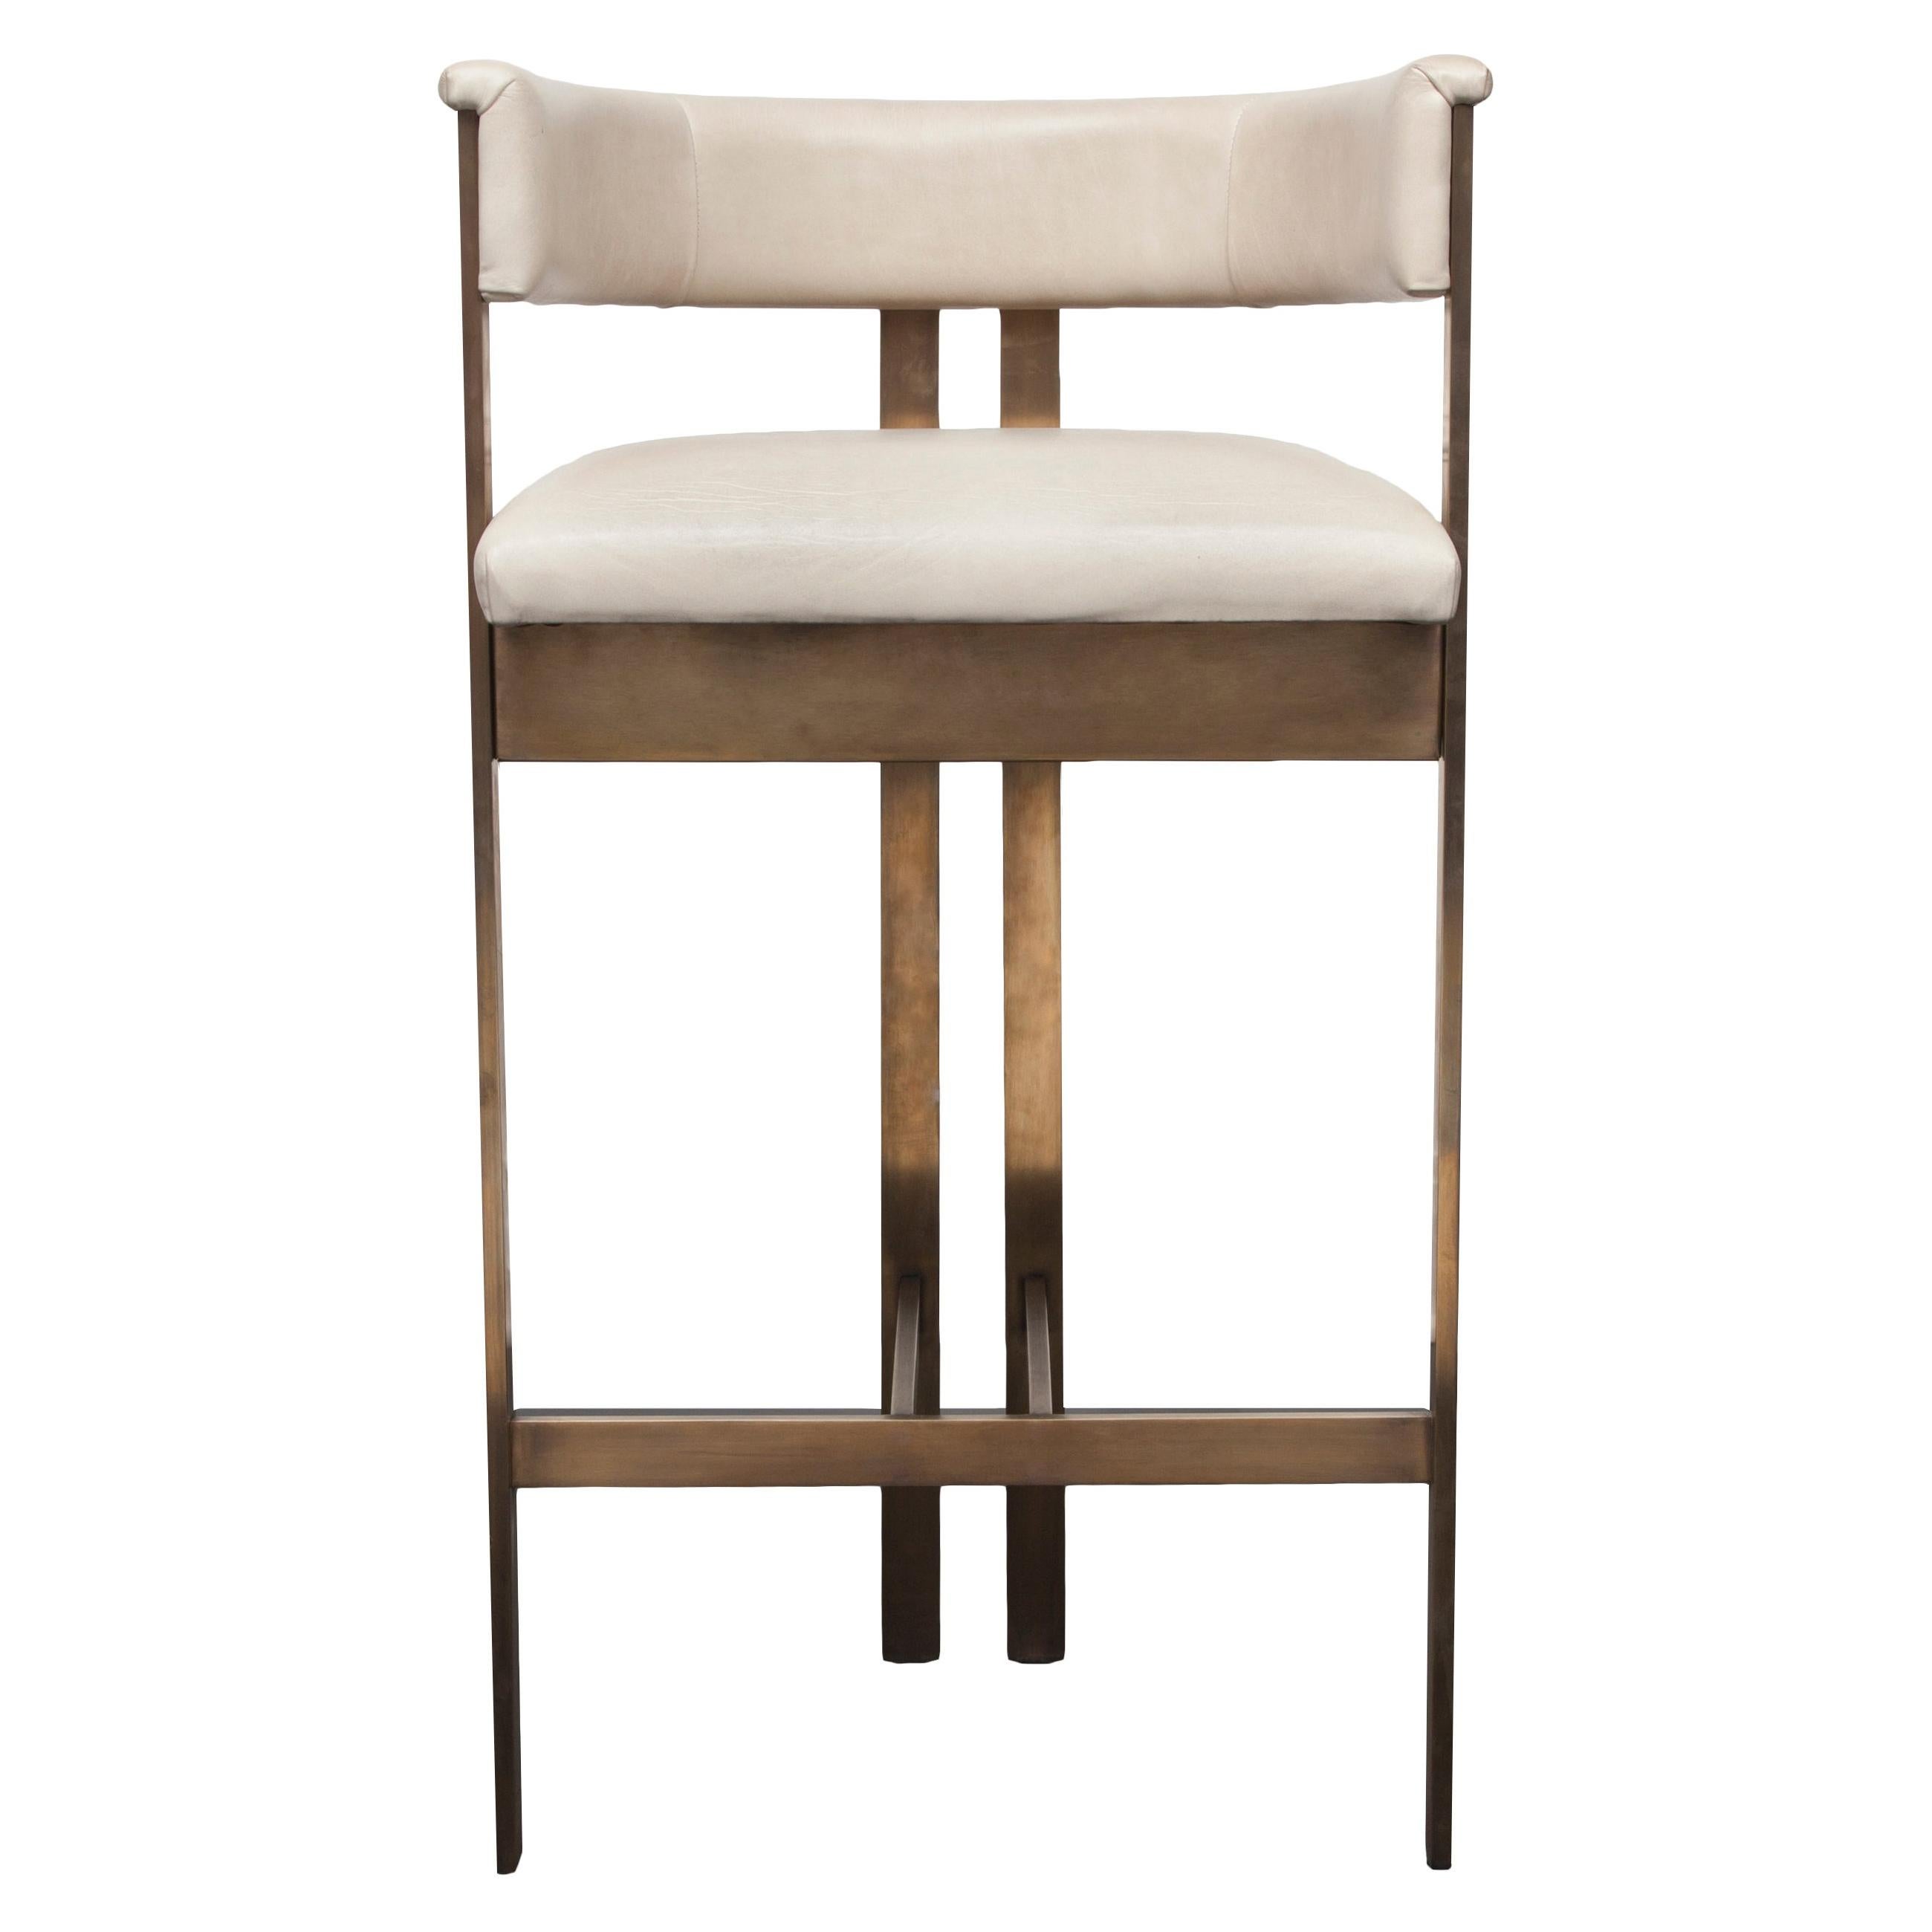 Kelly Wearstler Elliott Bar Stool in Burnished Brass and Ivory Leather For Sale